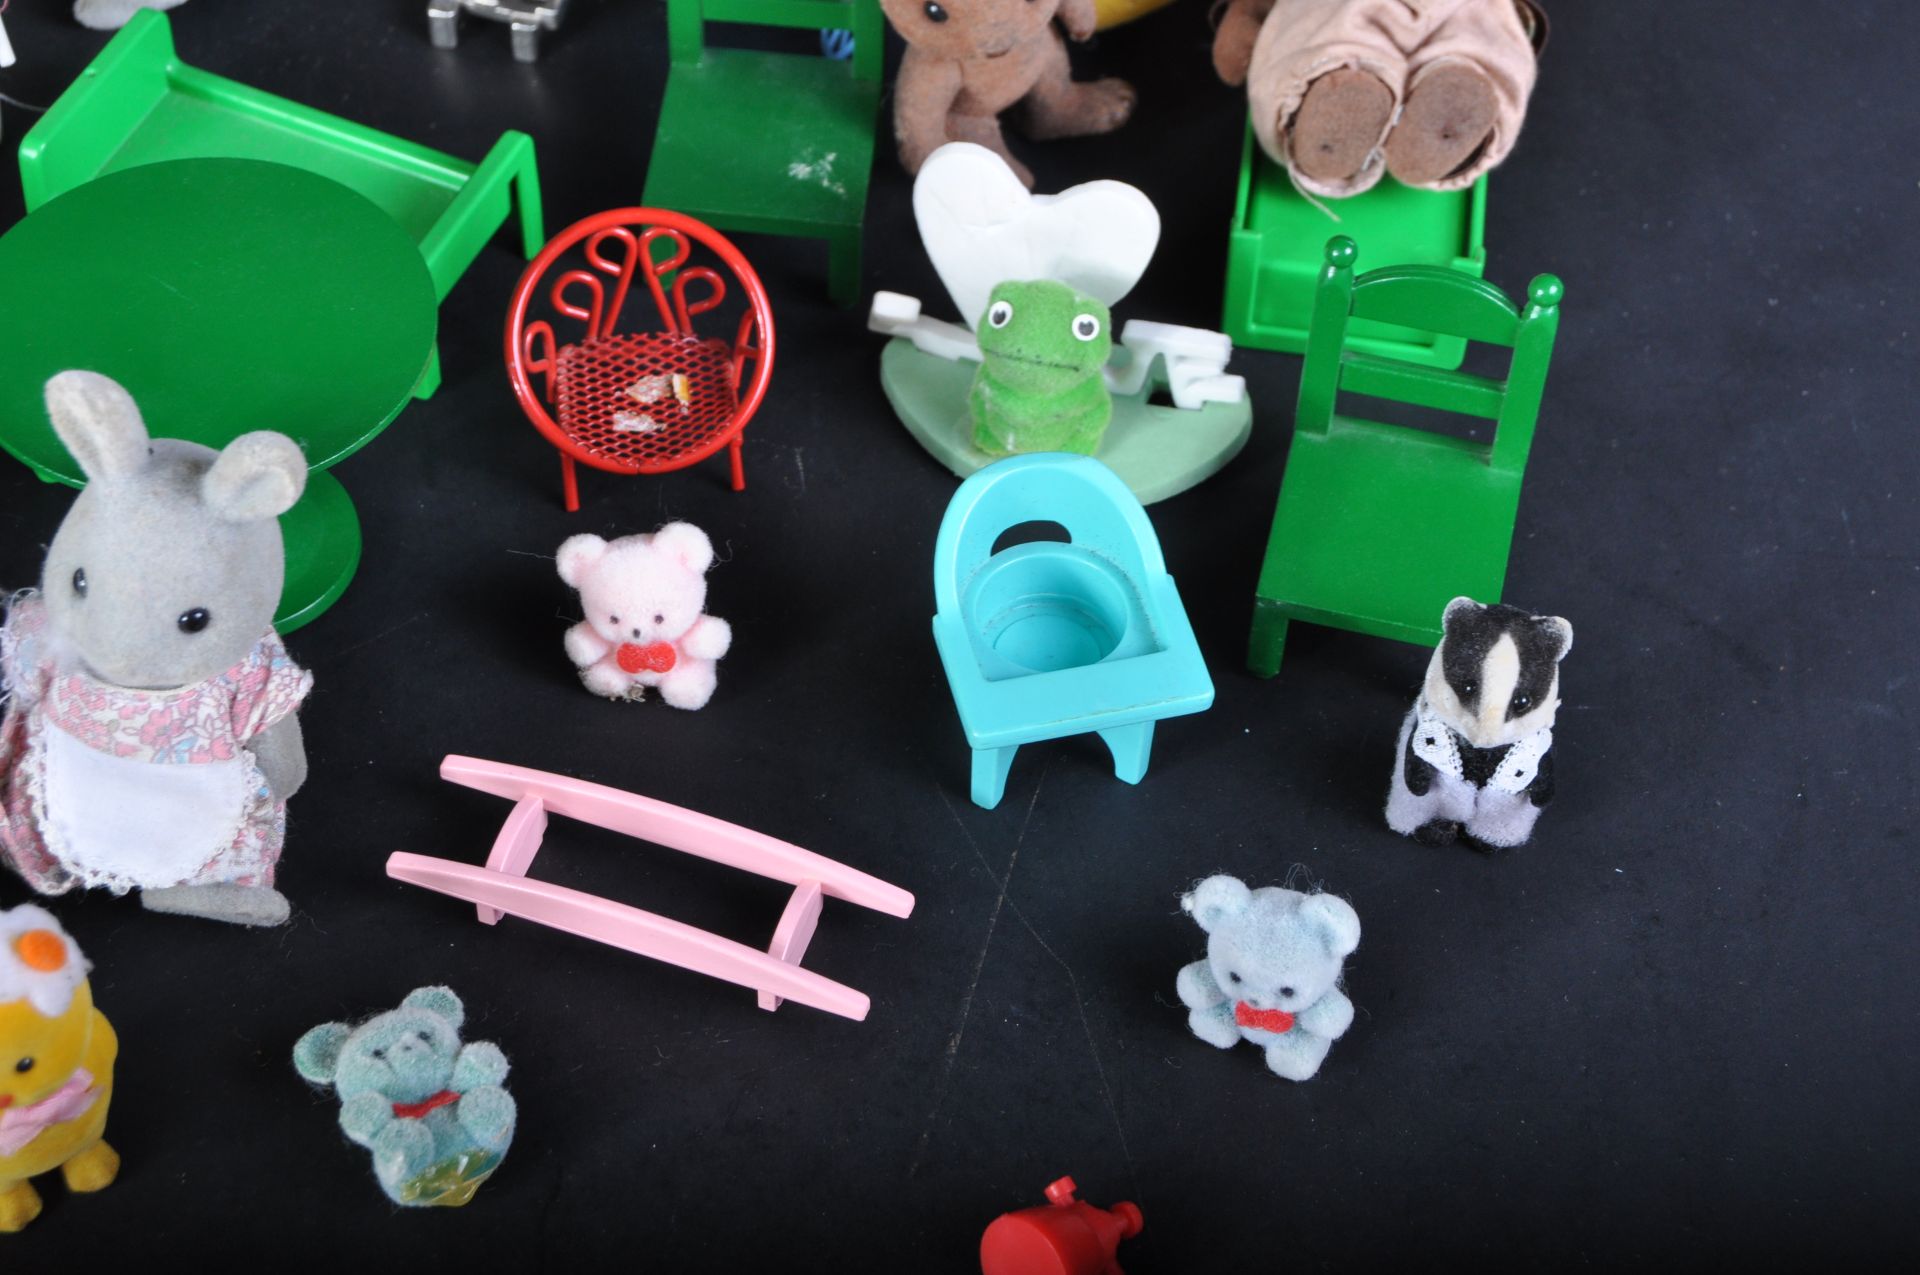 COLLECTION OF VINTAGE SYLVANIAN FAMILIES FIGURES & ACCESSORIES - Image 6 of 8